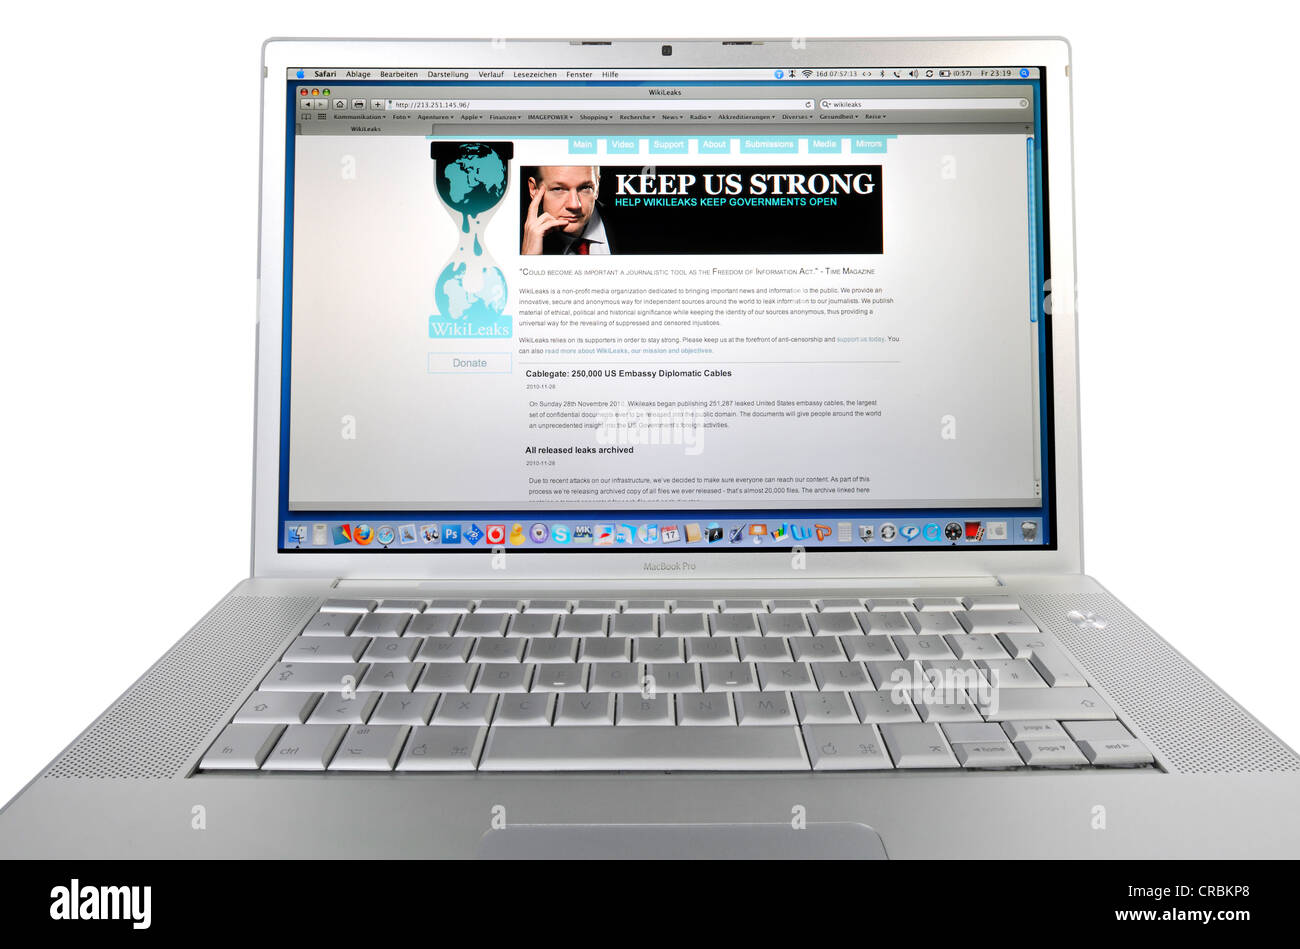 WikiLeaks showing a photo of founder Julian Assange, internet based social information portal, displayed on an Apple MacBook Pro Stock Photo